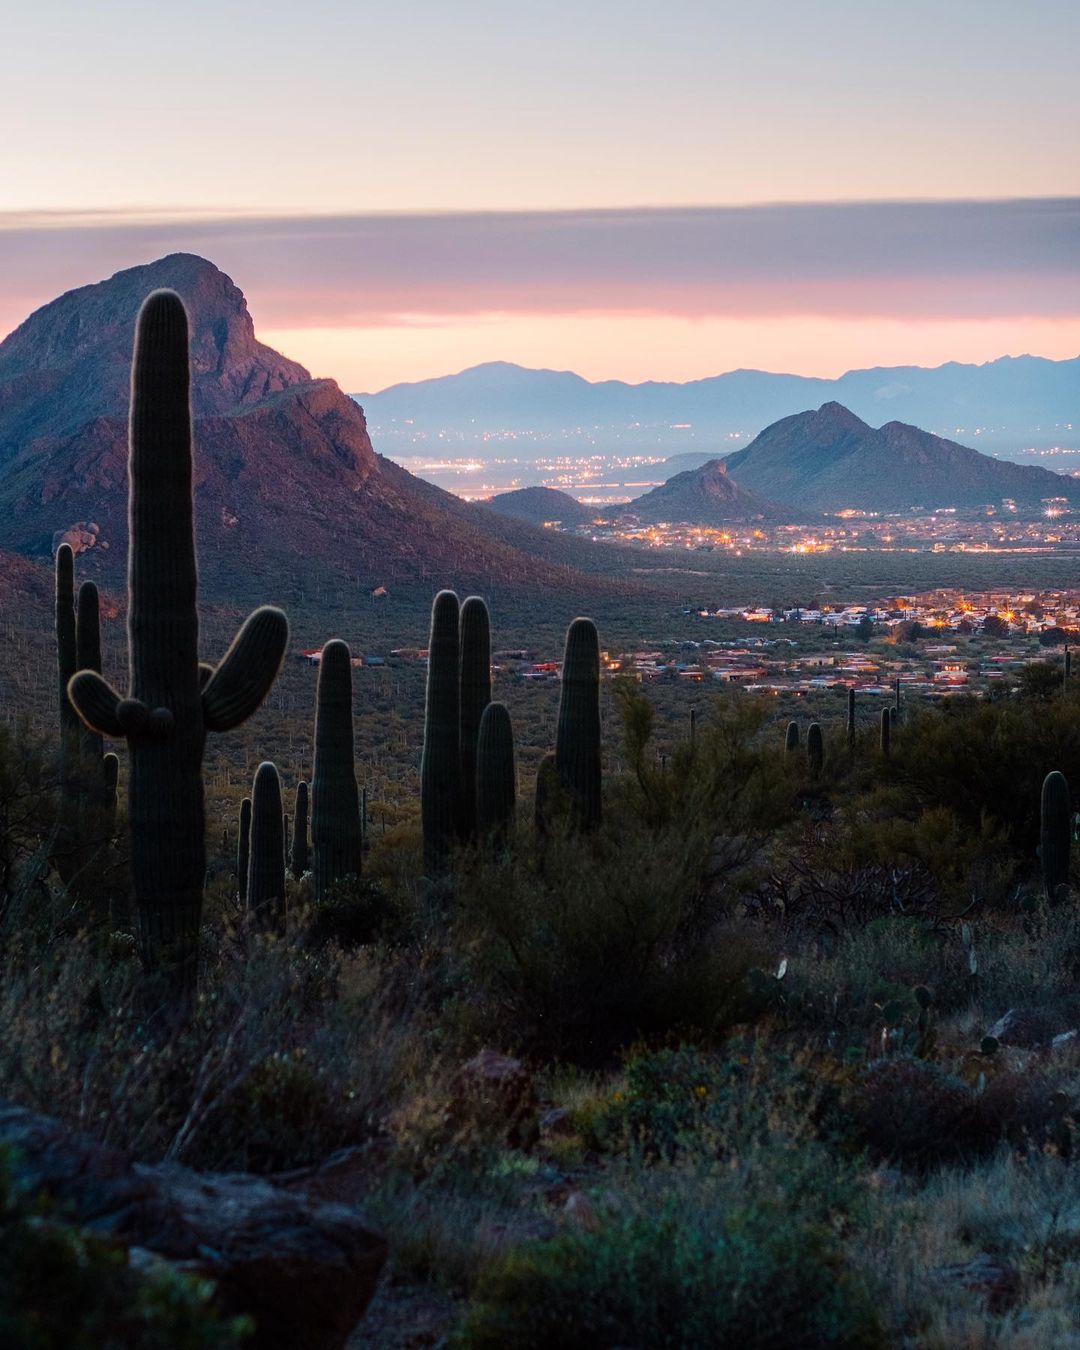 View of Downtown Tucson, AZ from up on Tucson Mountain Park. Photo by Instagram user @catsphotoshoot